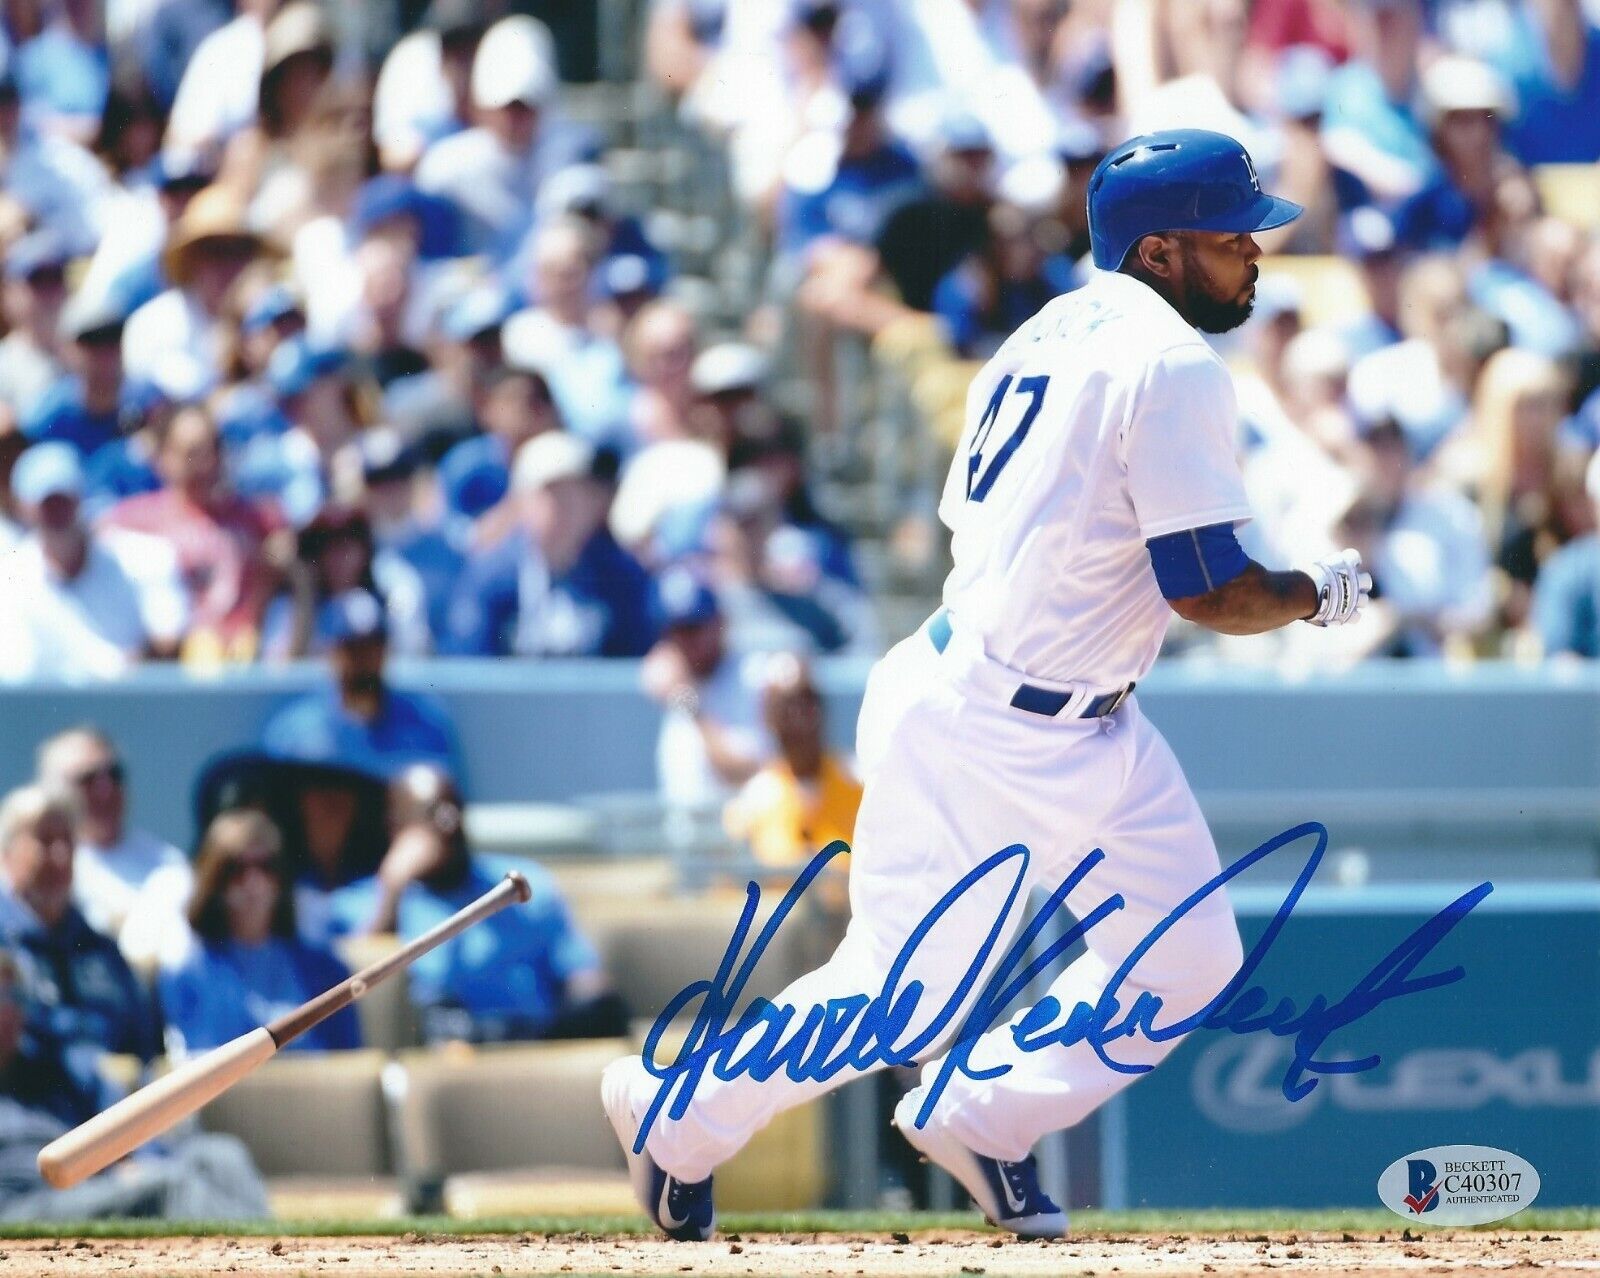 Autographed 8x10 HOWIE KENDRICK Los Angeles Dodgers Photo Poster painting - COA